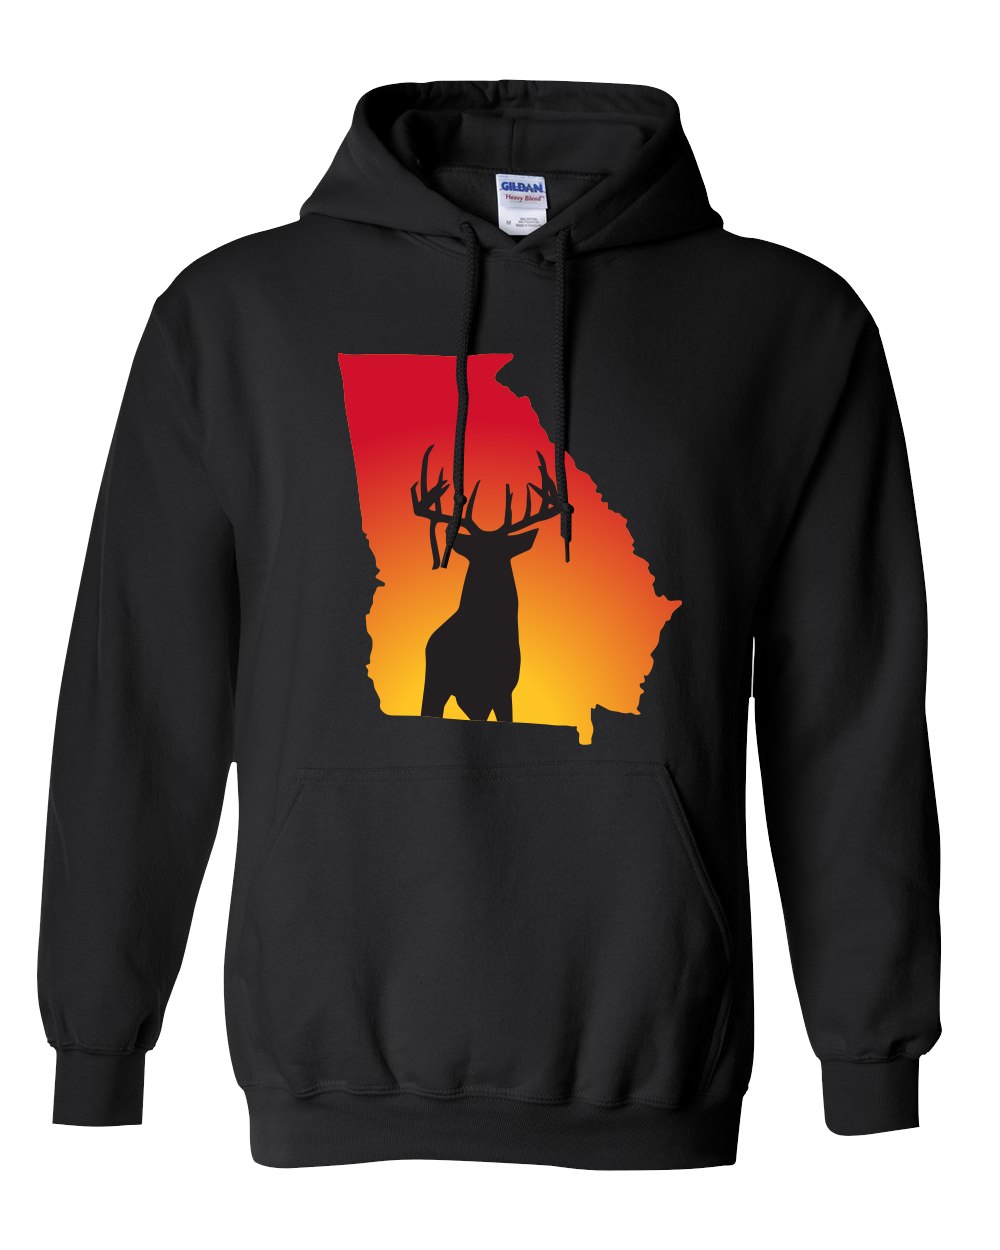 Pullover Hooded Sweatshirt Georgia Black Whitetail Deer Vibrant Design High Quality Tight Knit Ring Spun Low Maintenance Cotton Printed With The Newest Available Color Transfer Technology